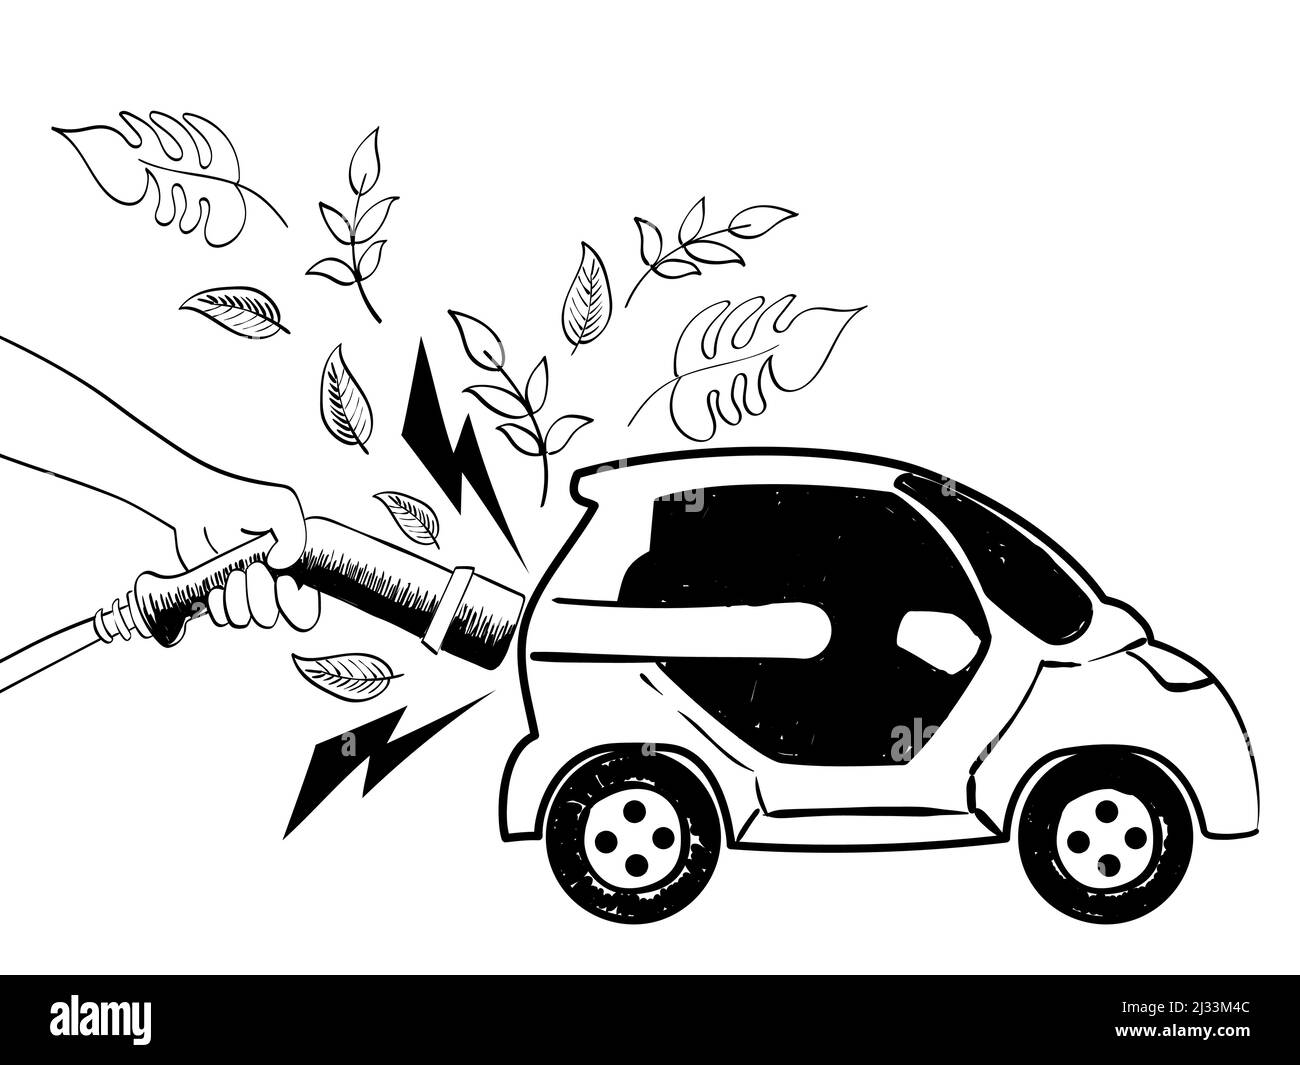 Sketch of hand holding a power cable supply to charging electric car, concept for alternative or renewable energy Stock Vector